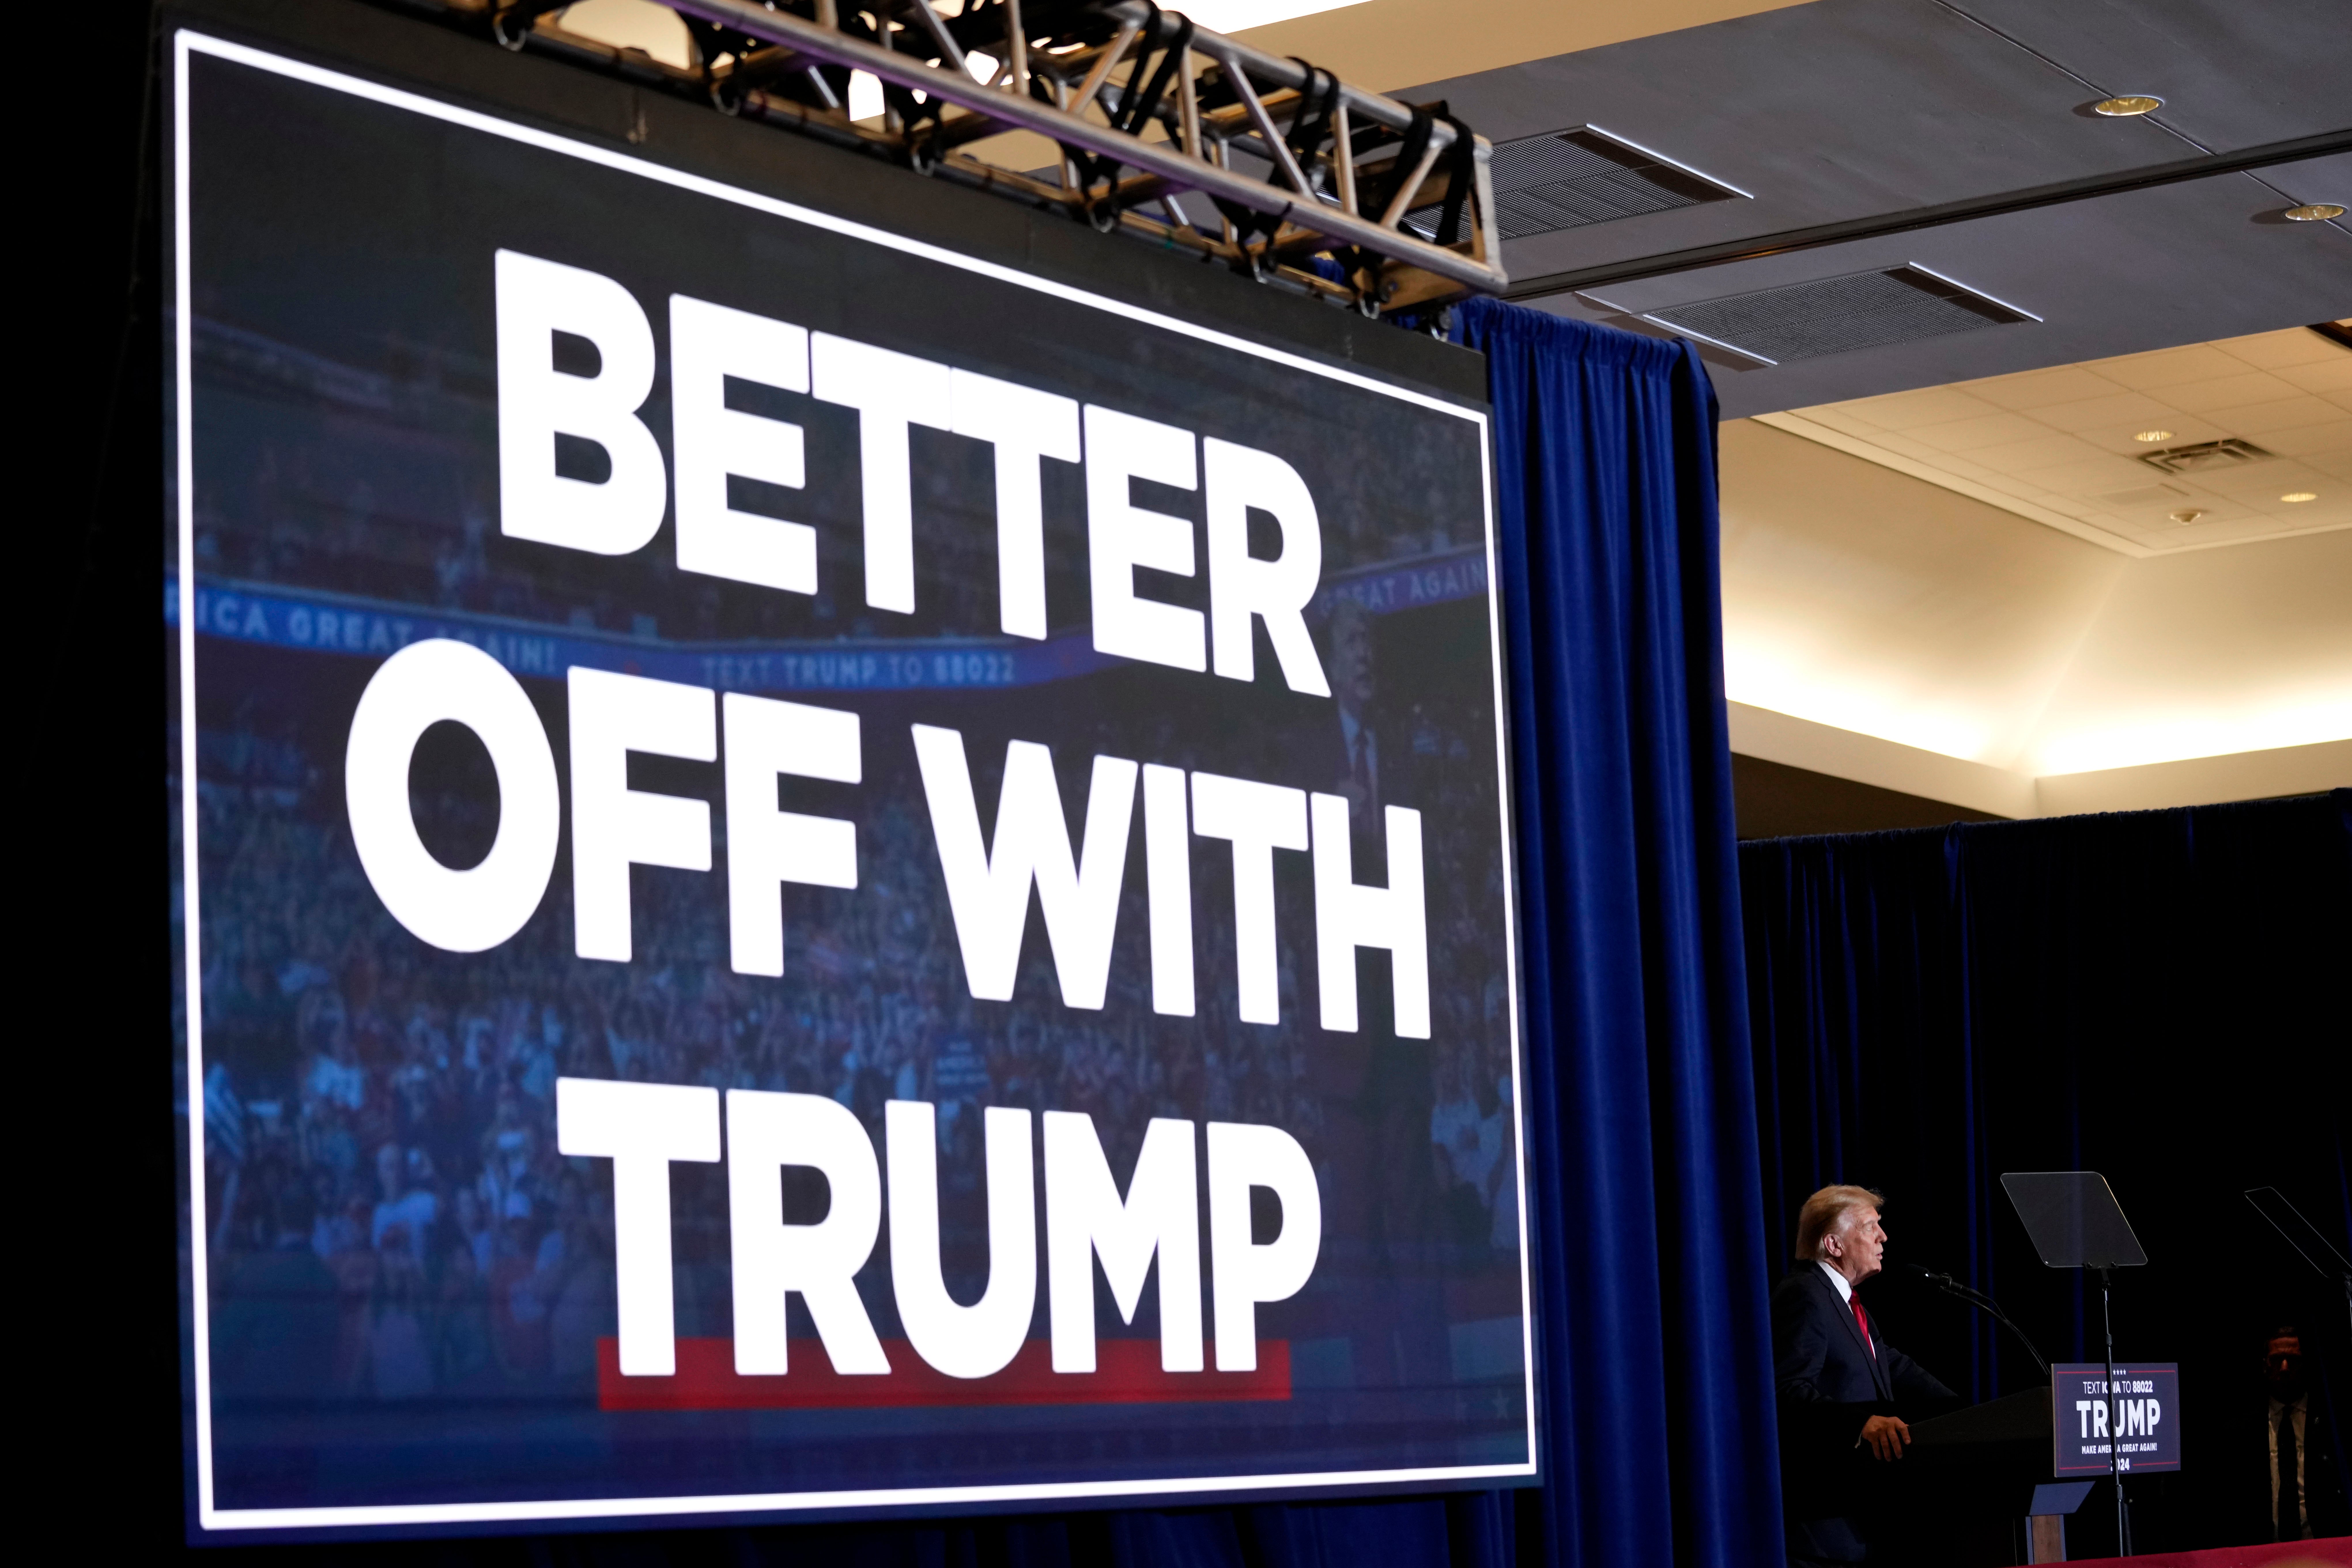 A campaign slogan hangs above Donald Trump as he speaks to supporters in Iowa on 13 December